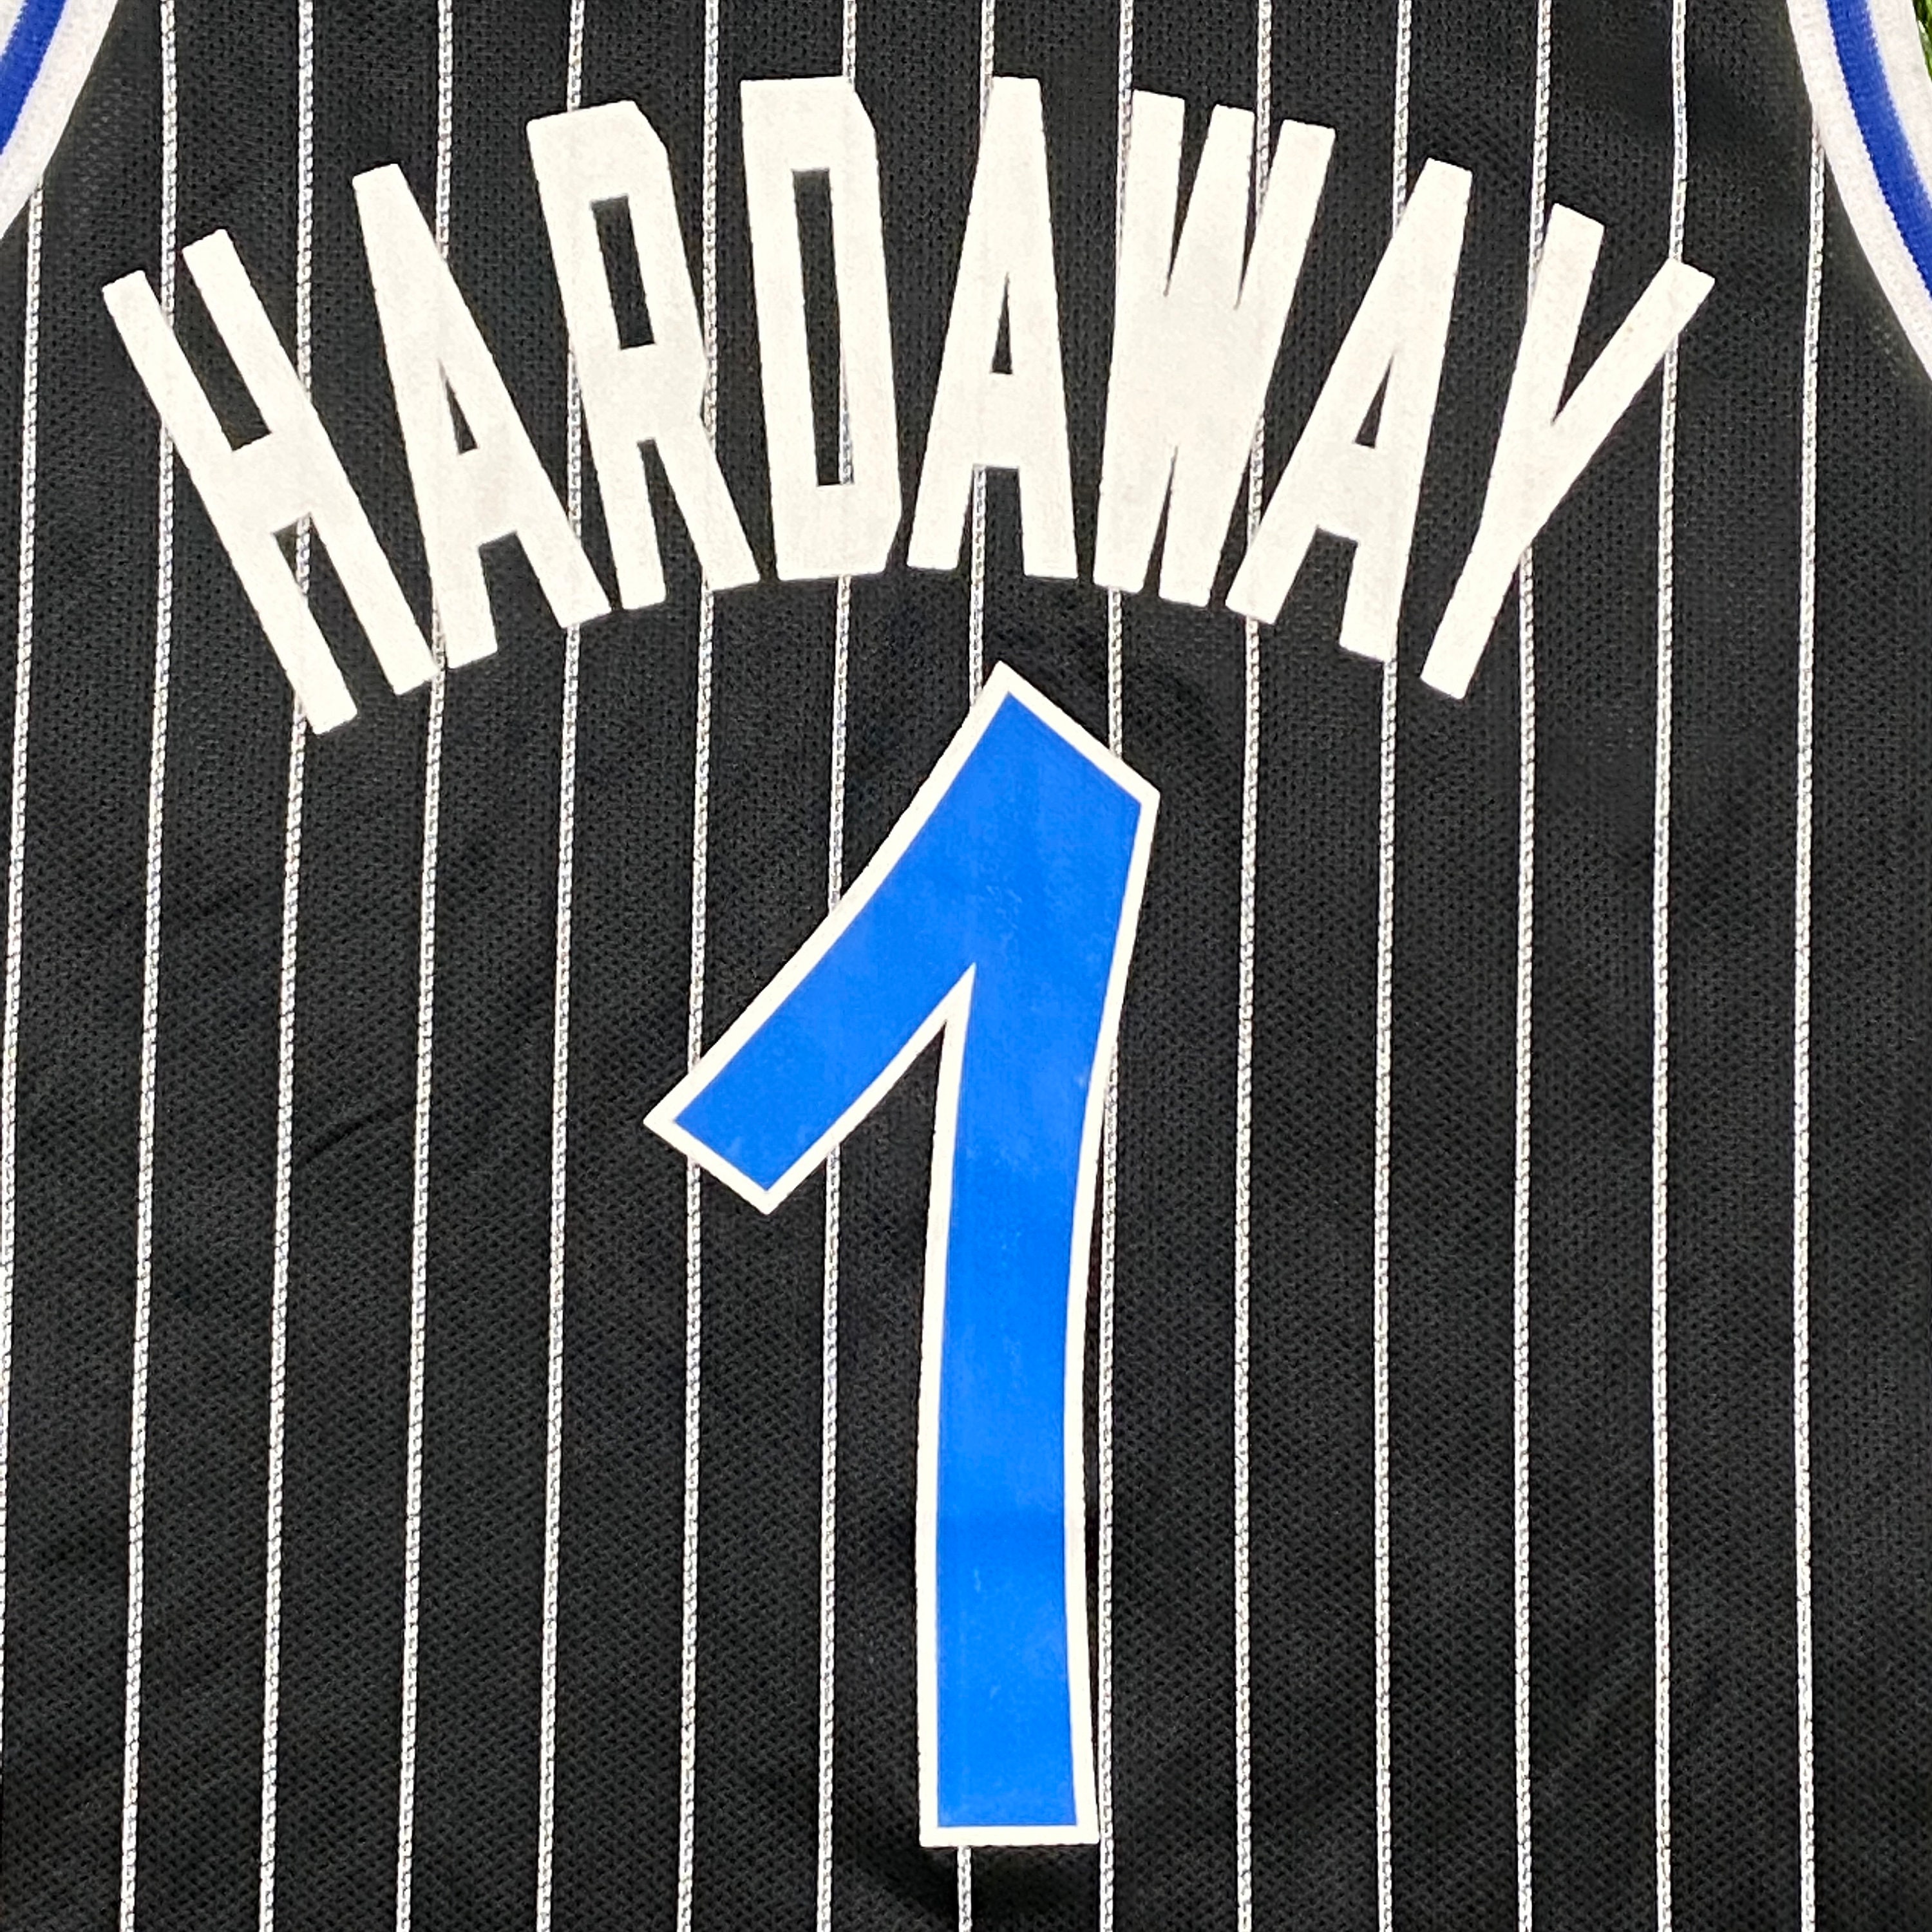 FORRARE VINTAGE NBA ORLANDO MAGIC CHAMPION PENNY HARDAWAY JERSEY for Sale  in Tempe, AZ - OfferUp